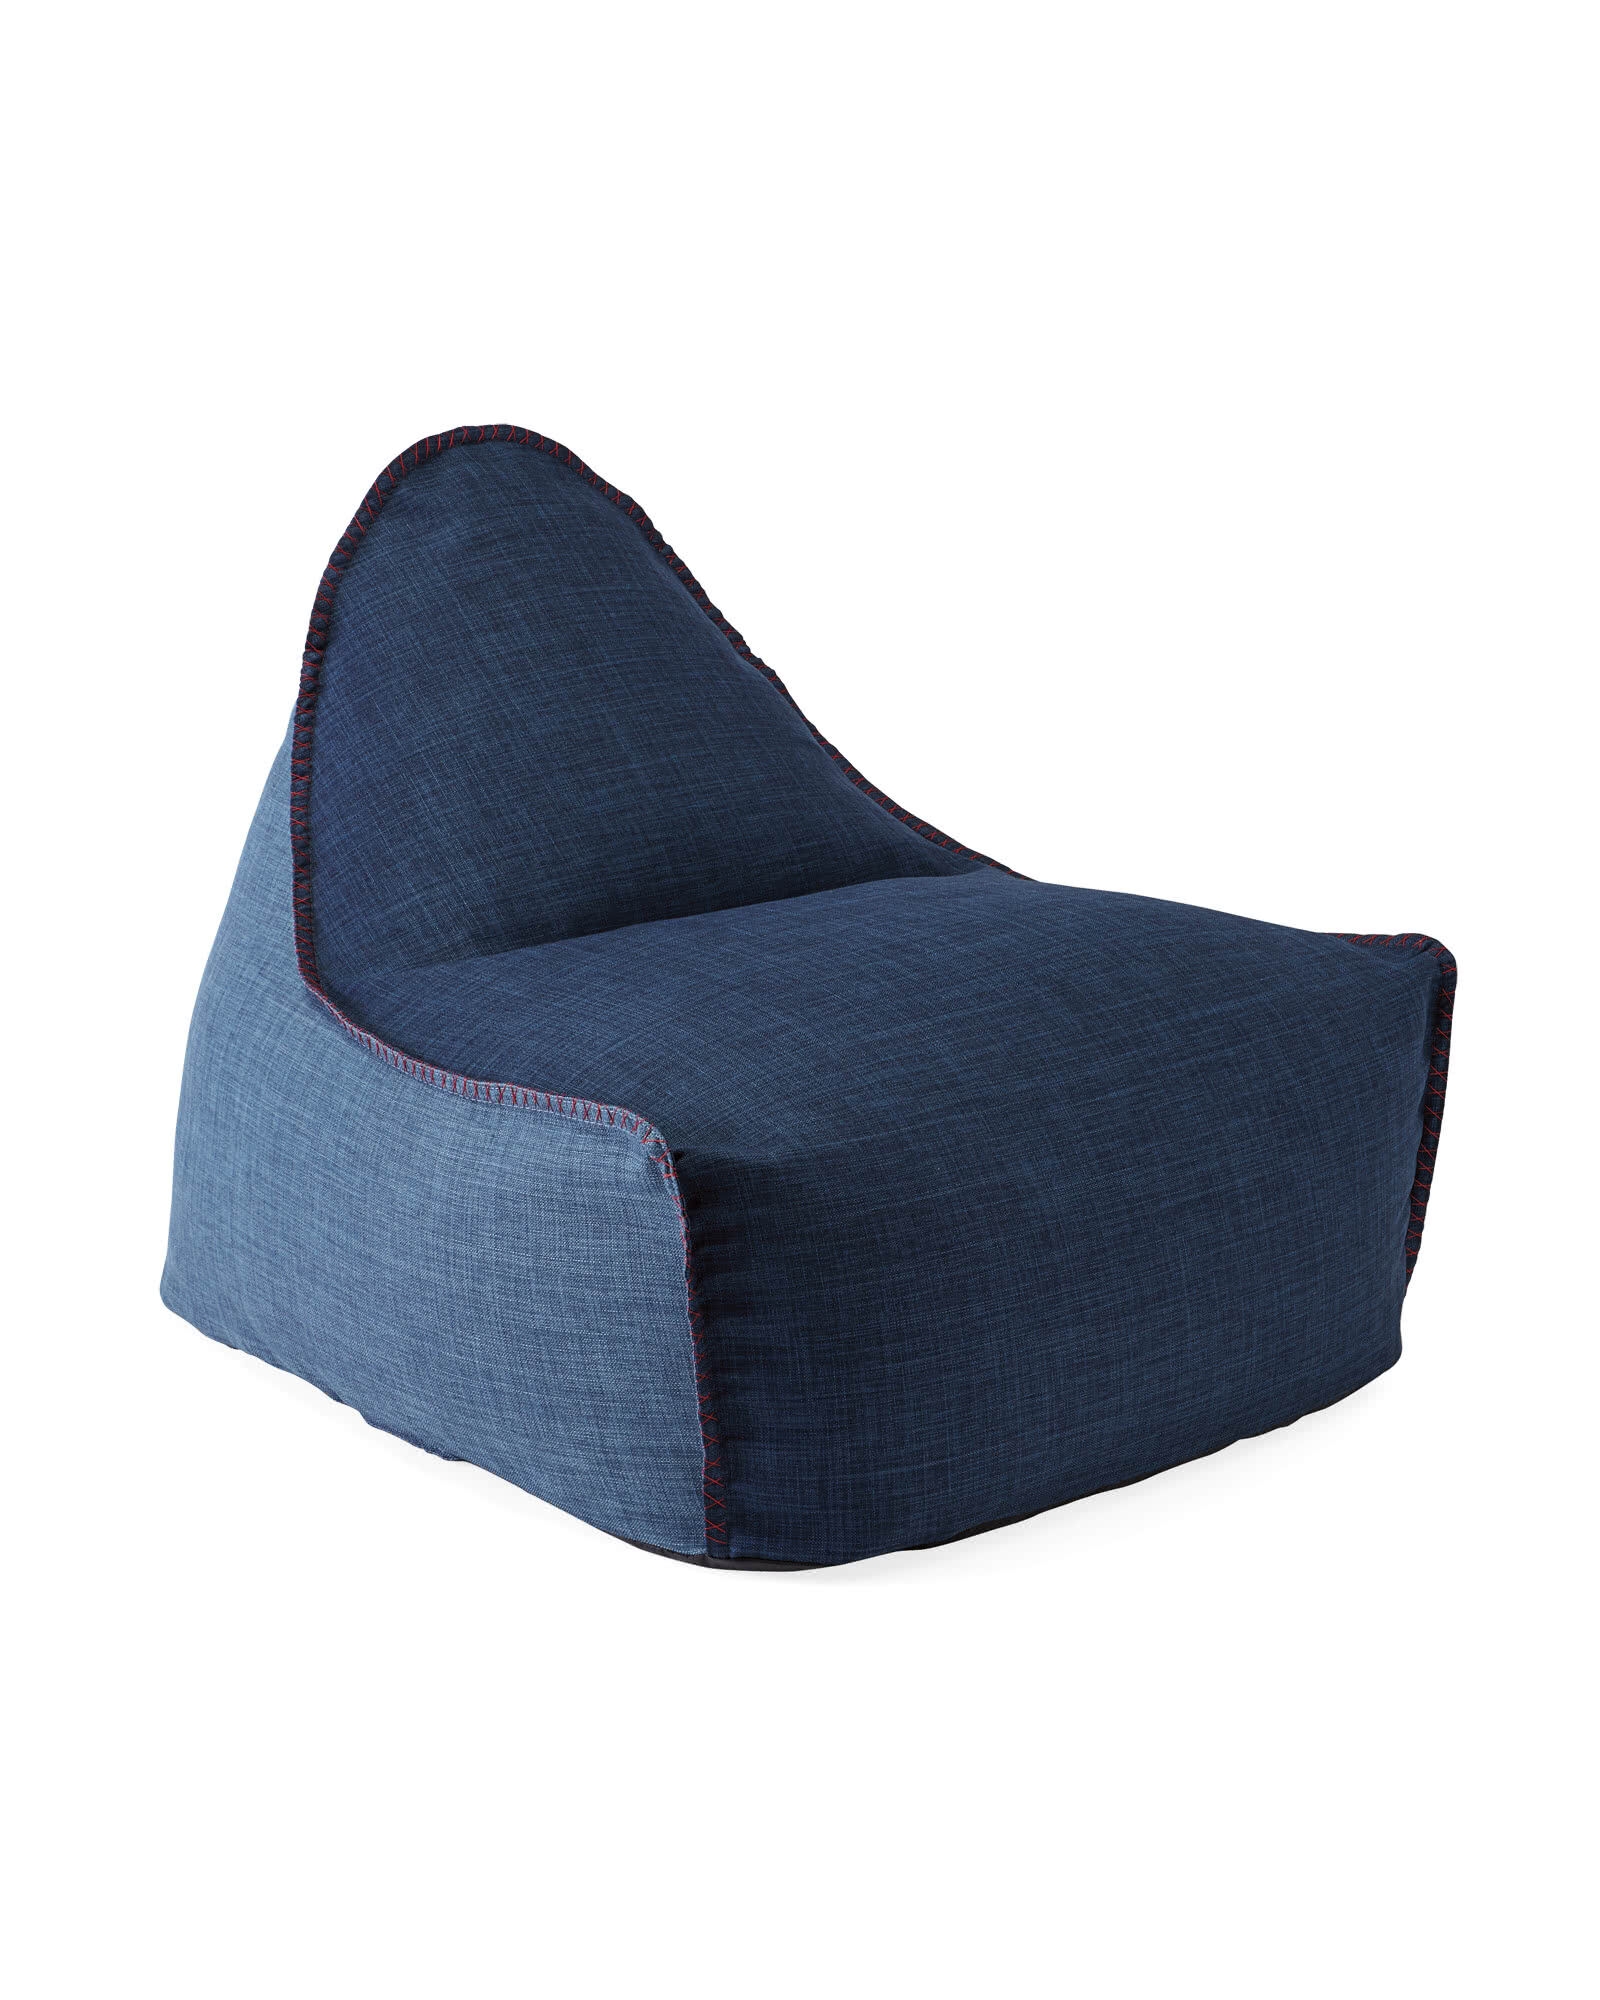 Newport Lounger - Solid - Image 0